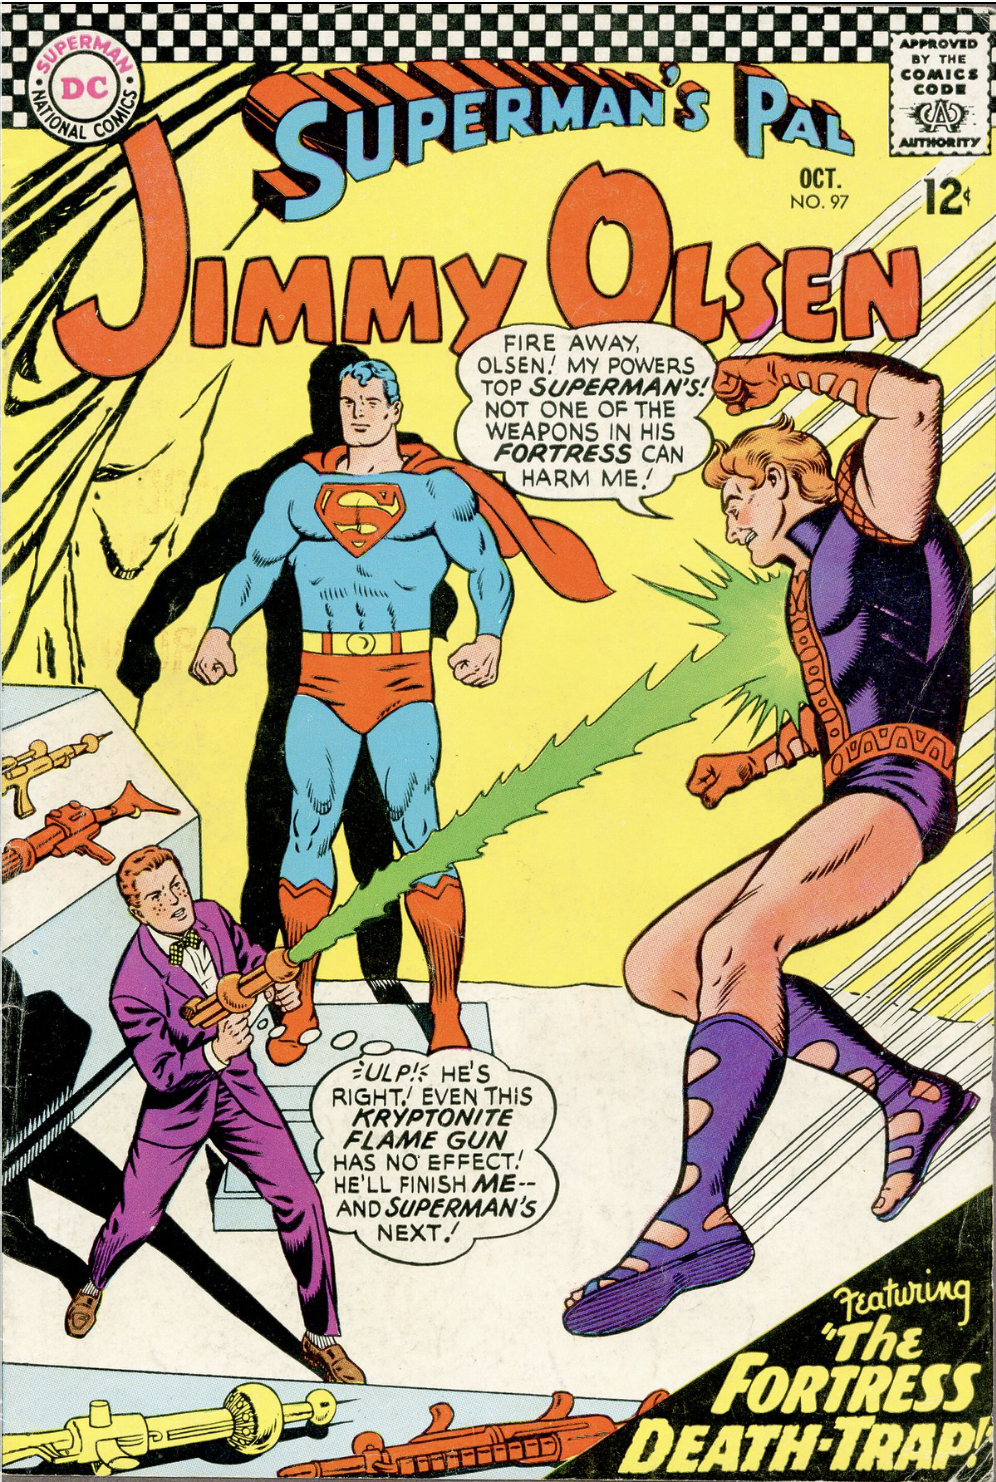 The Summer Knows (Jimmy Olsen 97)